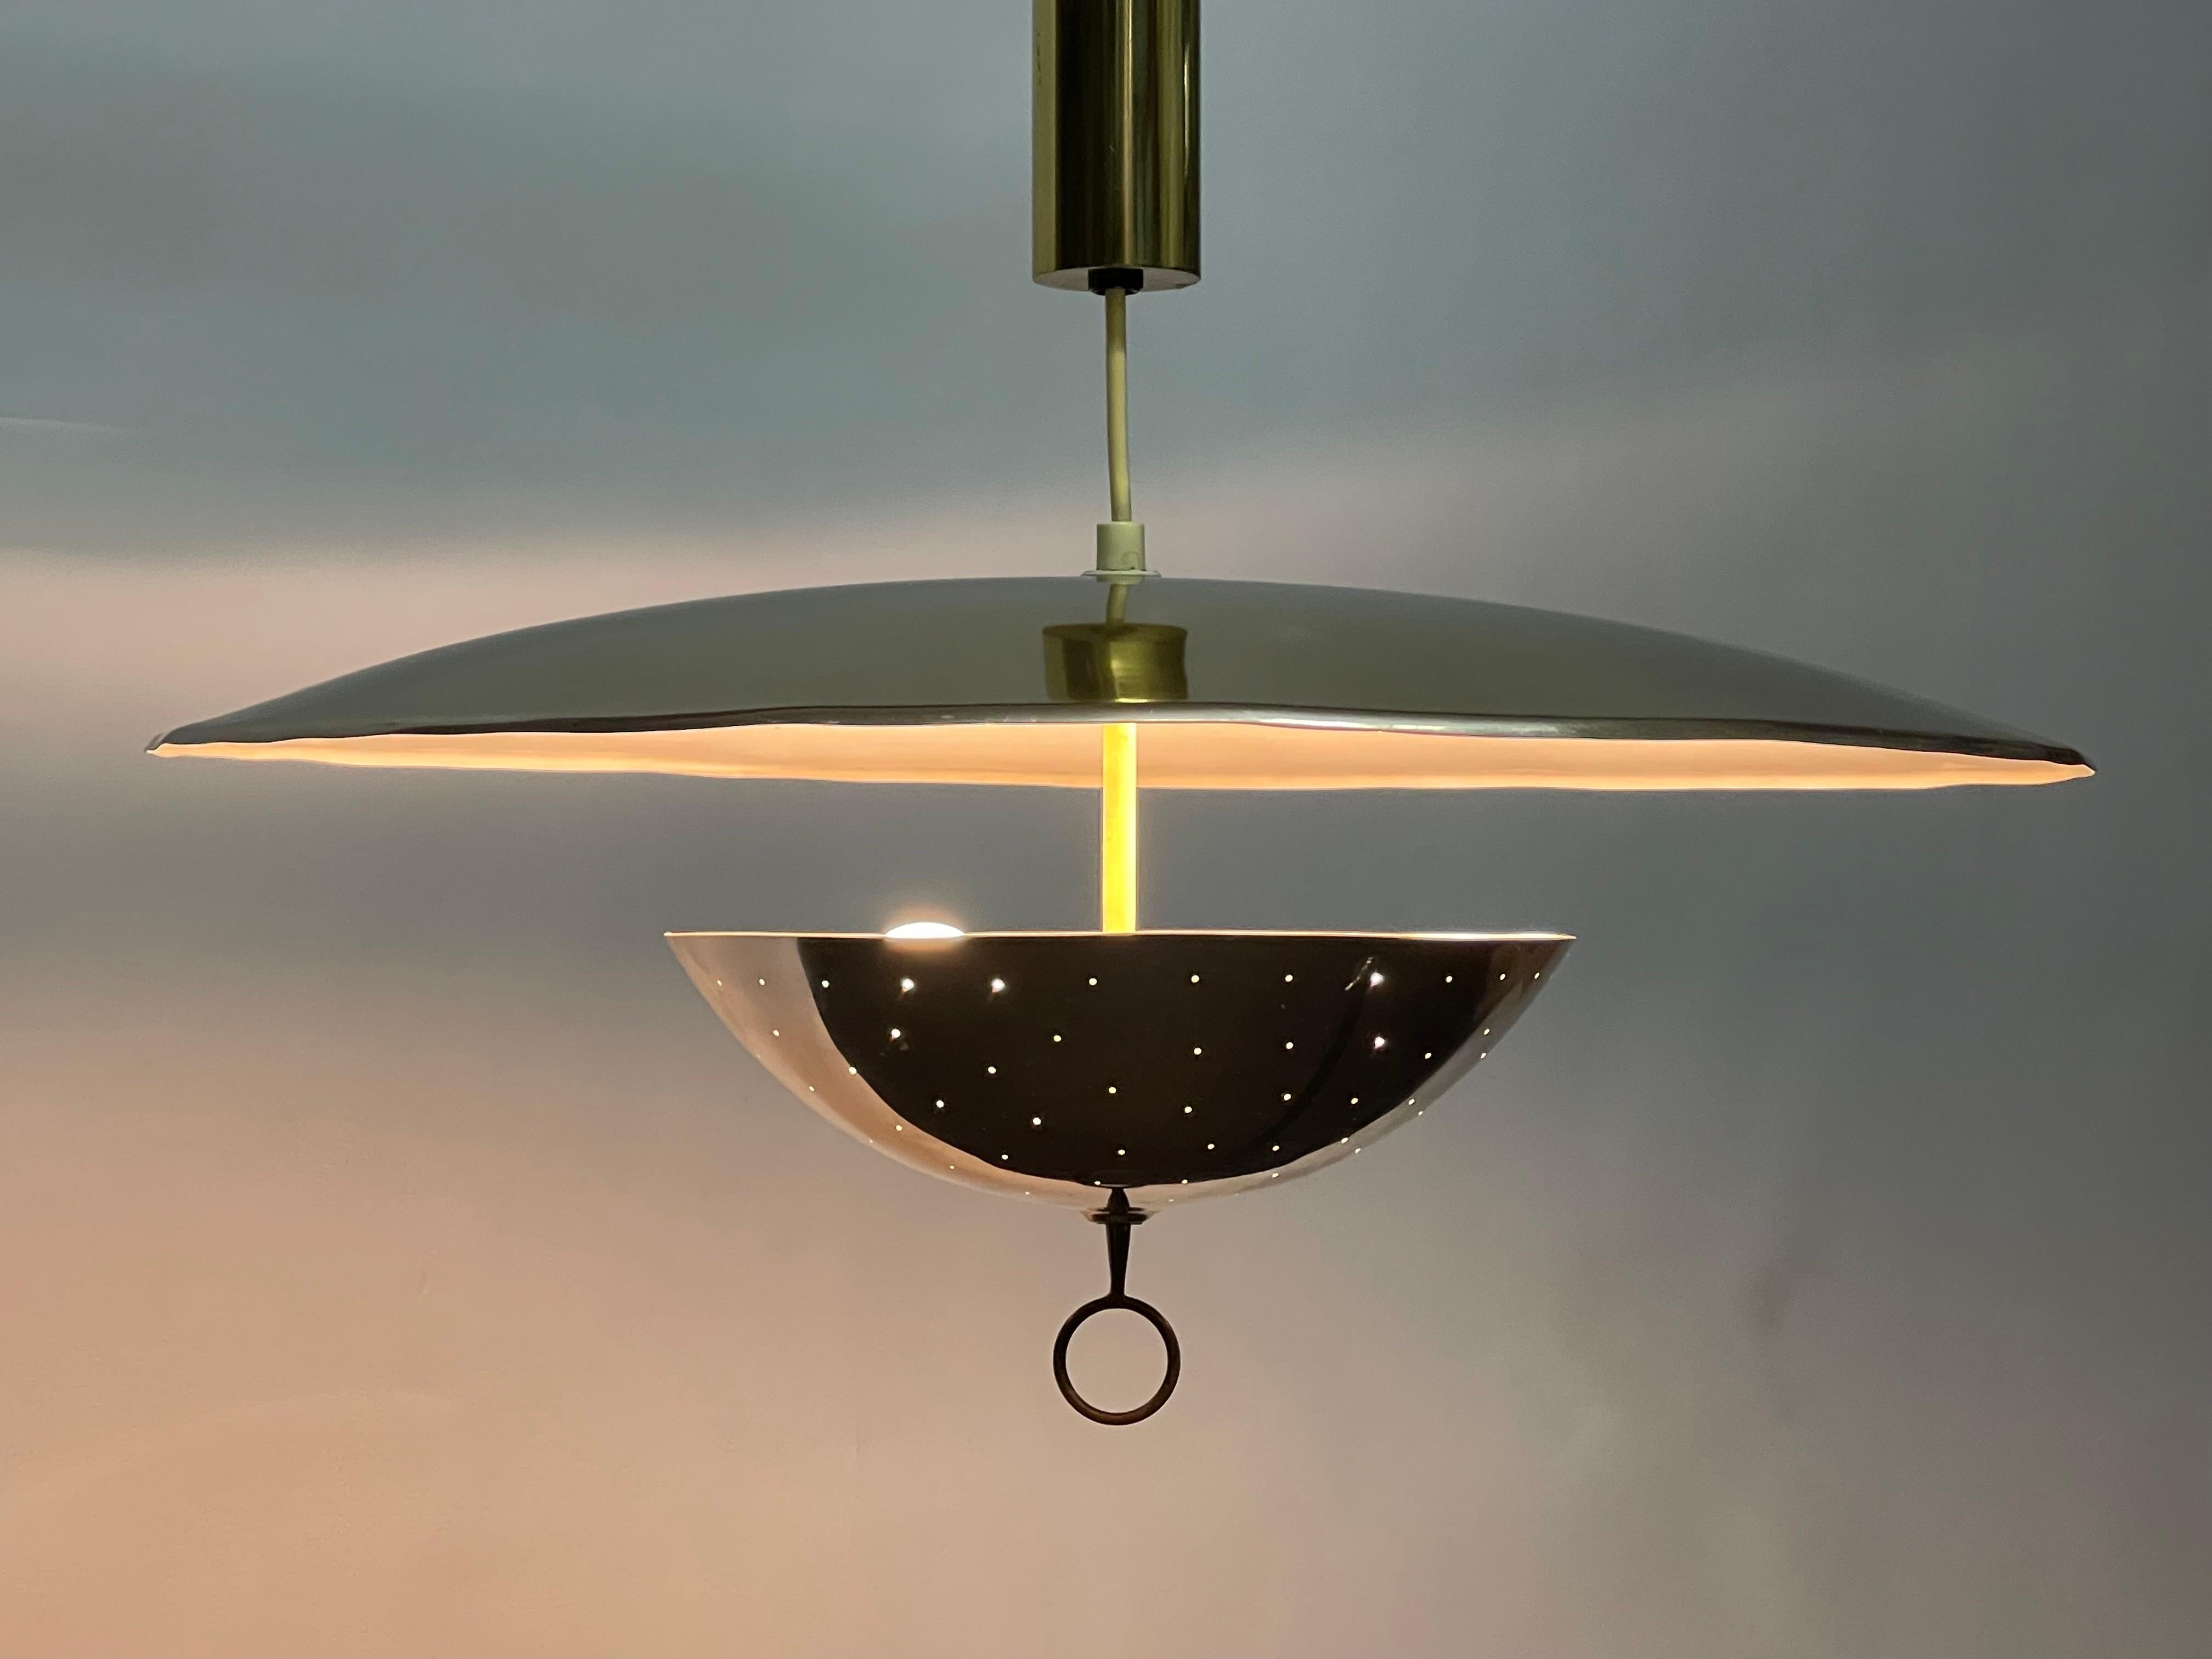 A very rare pendant lamp by Gino Sarfatti for Arteluce, Italy, circa 1950s.
Cup-shaped reflector in white lacquered and coppered aluminium. Counter cup in perforated and nickeled brass.
Ceiling fitting, handle and counterweight in polished brass